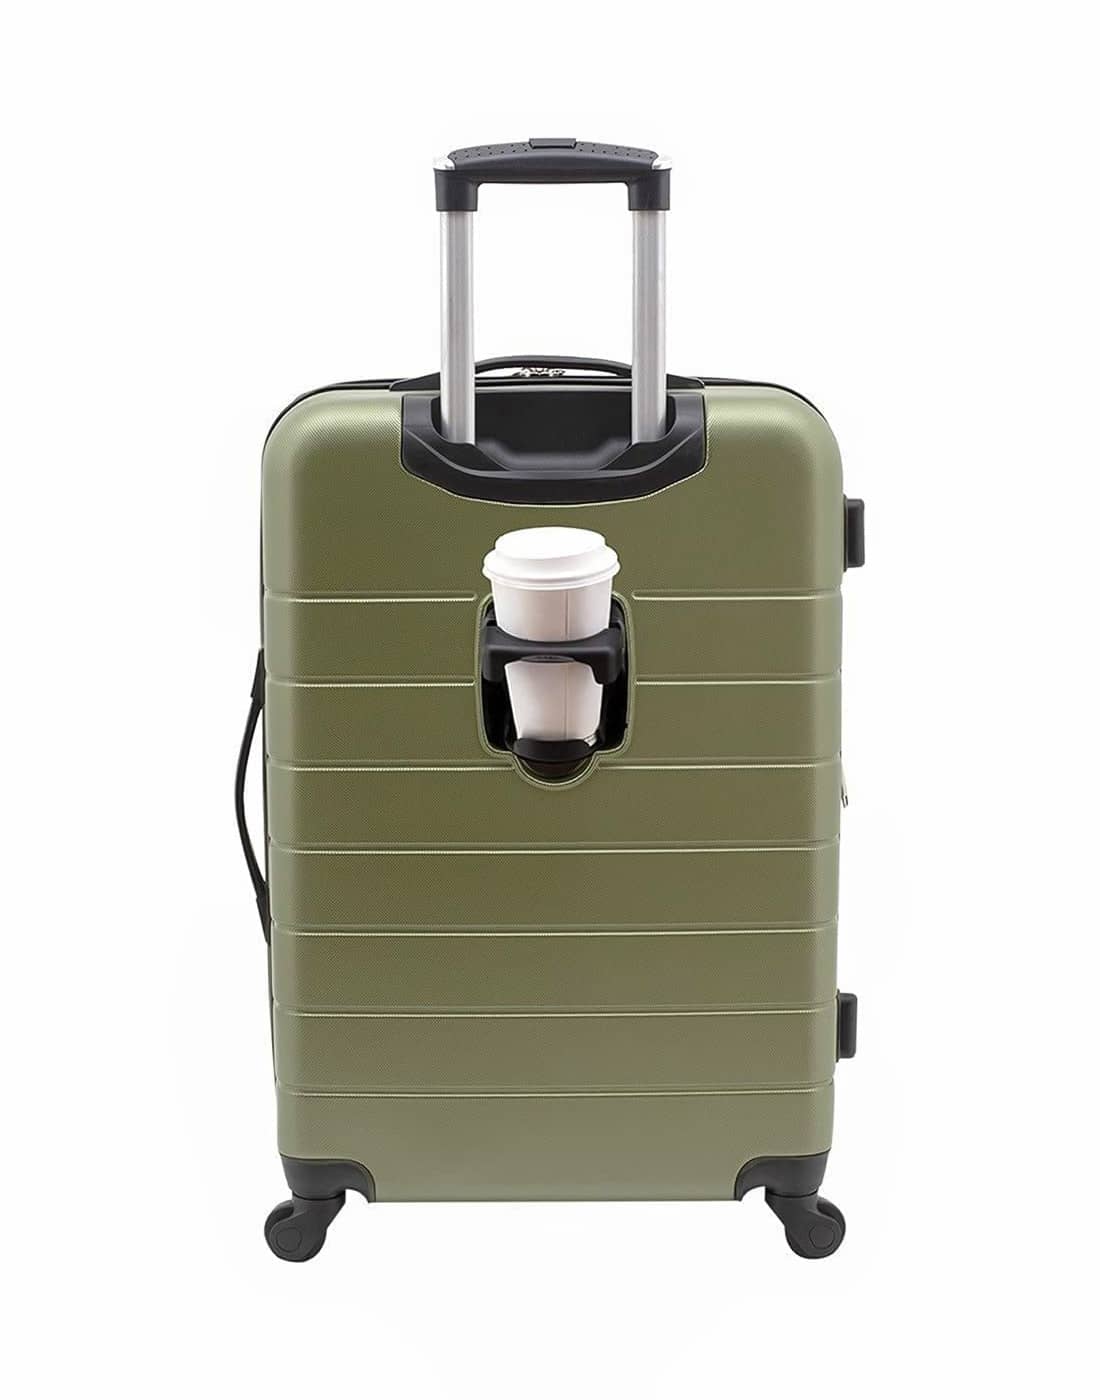 Carry on luggage with cup holder